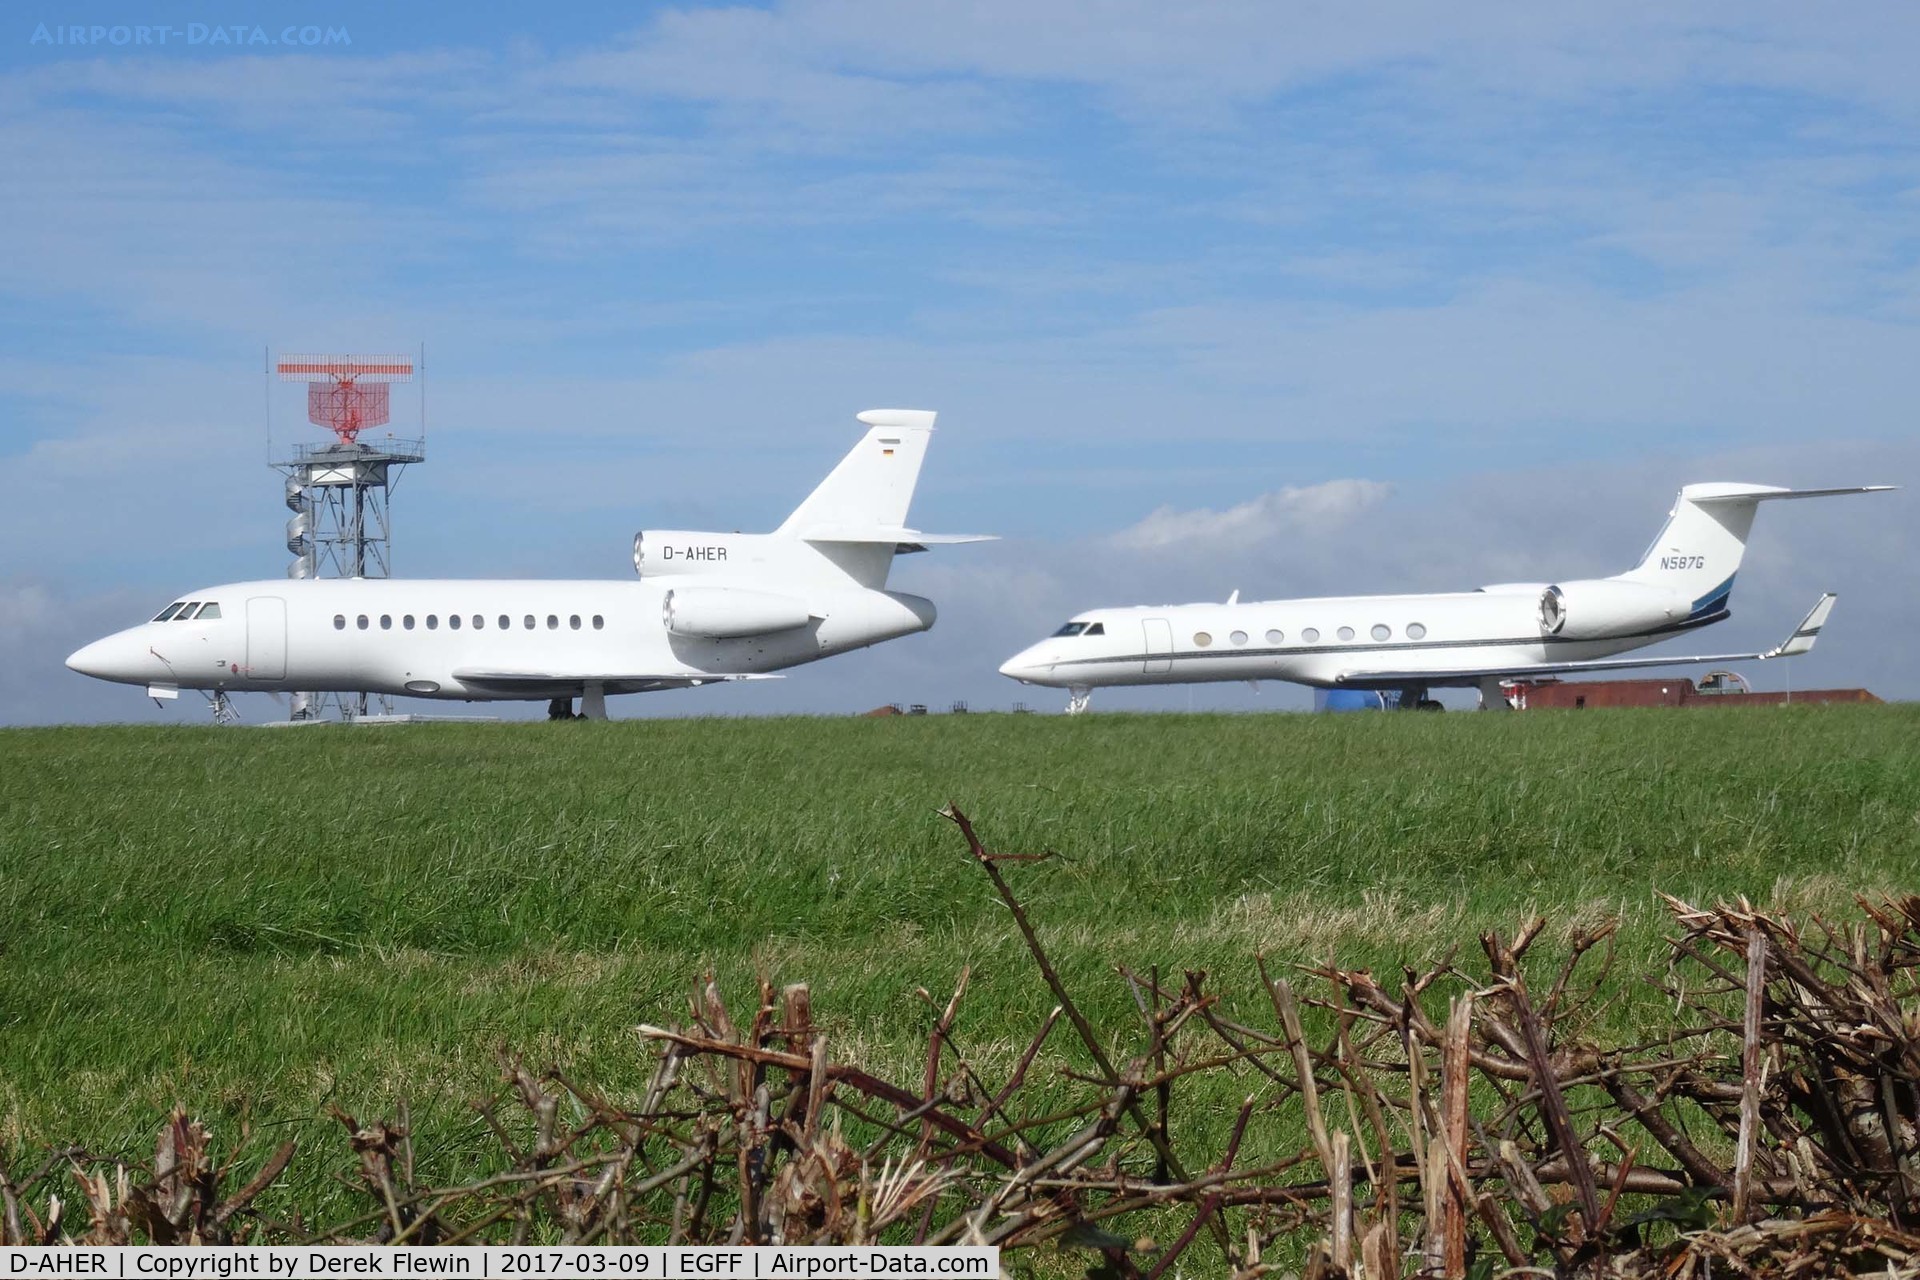 D-AHER, 2001 Dassault Falcon 900EX C/N 78, Falcon 900EX, and Gulfstream GV-SP, seen parked up.